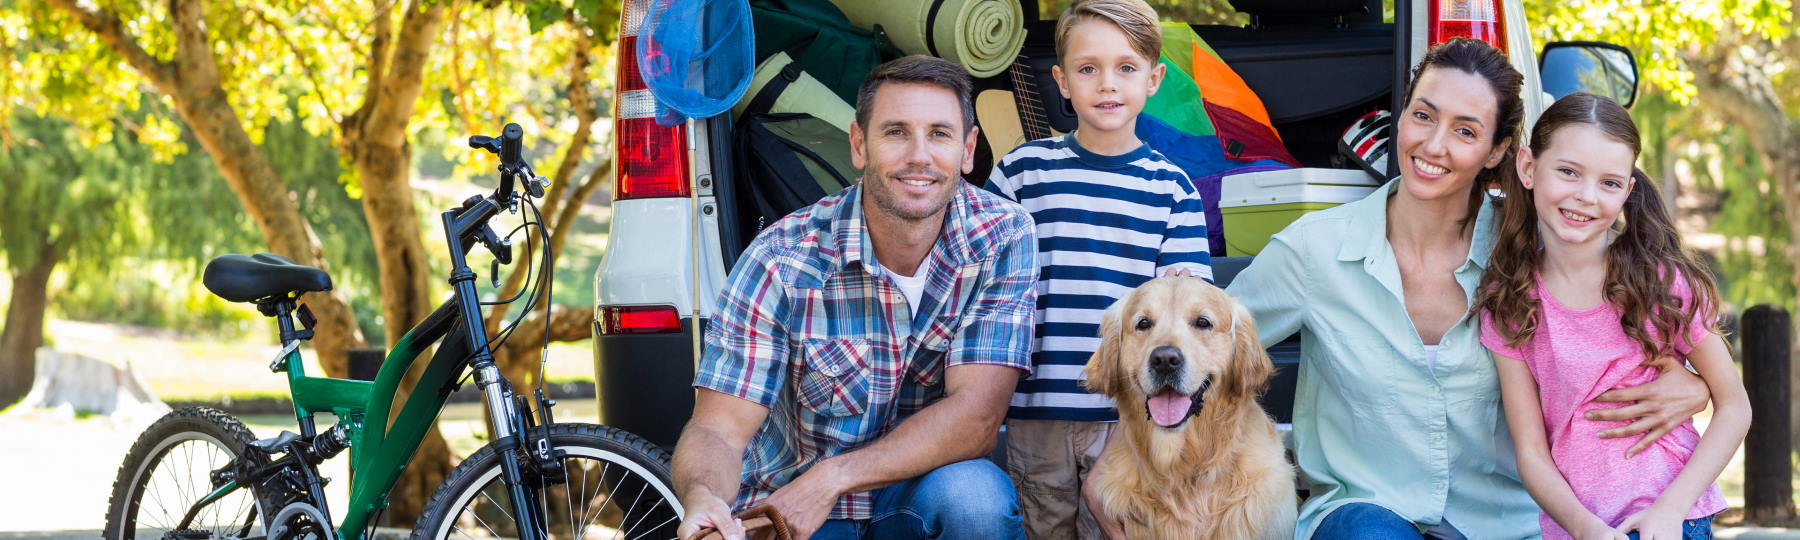 family of four with dog kneeling behind van